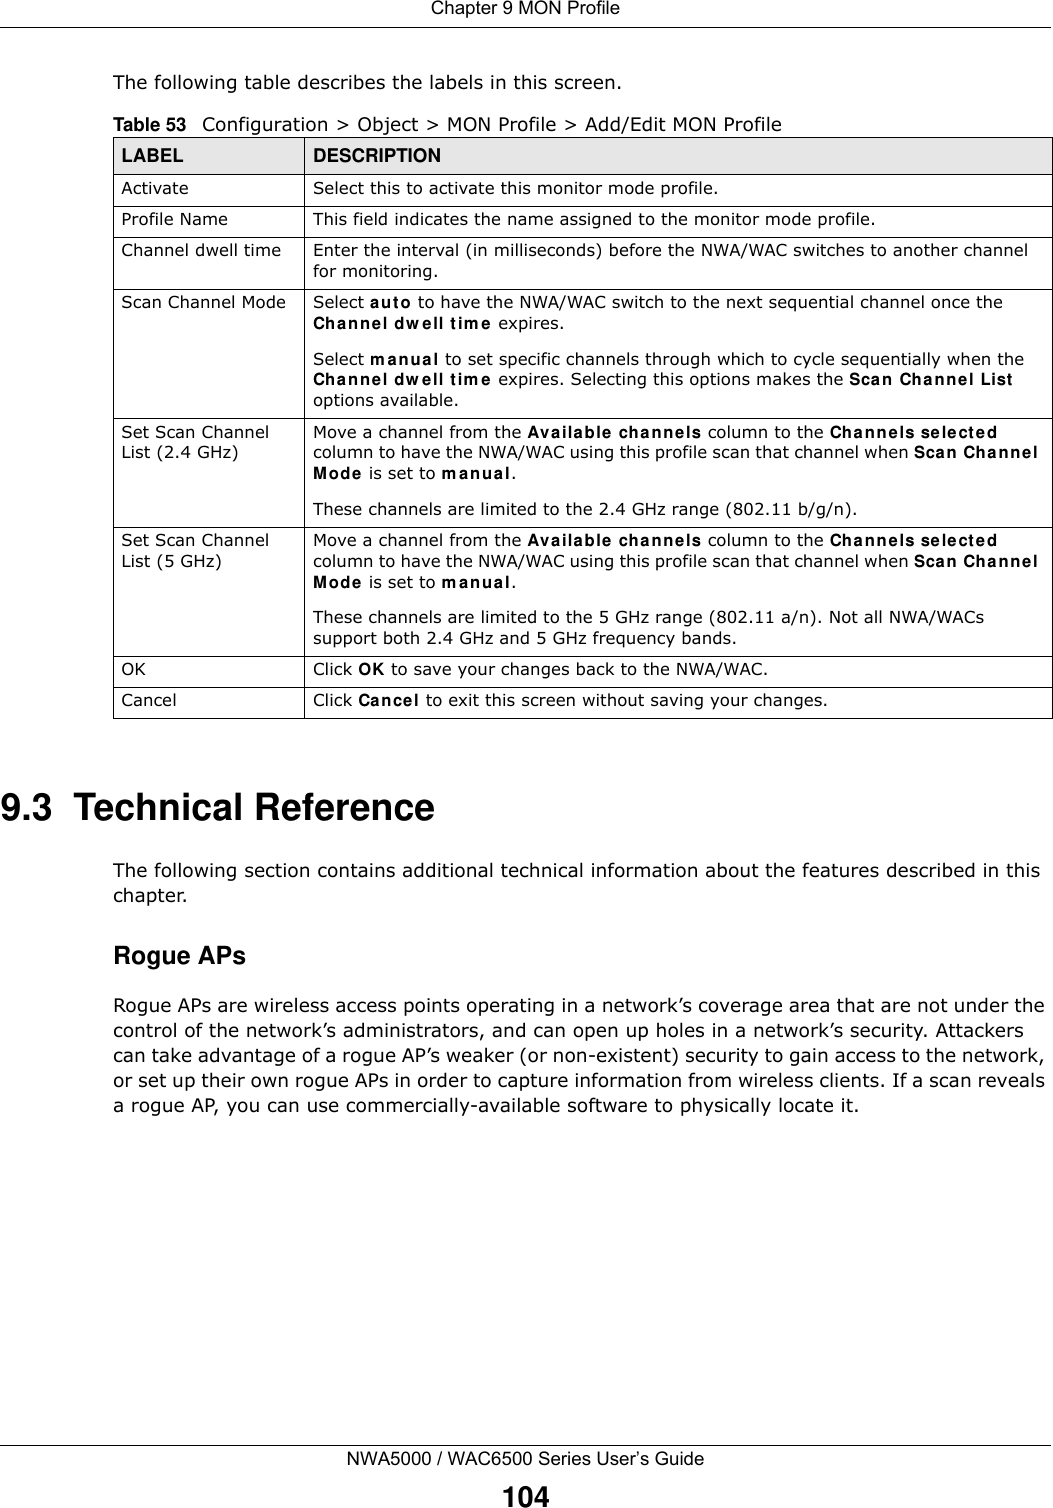 Chapter 9 MON ProfileNWA5000 / WAC6500 Series User’s Guide104The following table describes the labels in this screen.  9.3  Technical ReferenceThe following section contains additional technical information about the features described in this chapter.Rogue APsRogue APs are wireless access points operating in a network’s coverage area that are not under the control of the network’s administrators, and can open up holes in a network’s security. Attackers can take advantage of a rogue AP’s weaker (or non-existent) security to gain access to the network, or set up their own rogue APs in order to capture information from wireless clients. If a scan reveals a rogue AP, you can use commercially-available software to physically locate it.Table 53   Configuration &gt; Object &gt; MON Profile &gt; Add/Edit MON ProfileLABEL DESCRIPTIONActivate Select this to activate this monitor mode profile.Profile Name This field indicates the name assigned to the monitor mode profile.Channel dwell time Enter the interval (in milliseconds) before the NWA/WAC switches to another channel for monitoring.Scan Channel Mode Select a u t o to have the NWA/WAC switch to the next sequential channel once the Channel dw ell t im e expires.Select m anual to set specific channels through which to cycle sequentially when the Channel dw ell t im e expires. Selecting this options makes the Sca n  Channel List  options available.Set Scan Channel List (2.4 GHz)Move a channel from the Ava ilable  cha nnels column to the Channels sele ct ed column to have the NWA/WAC using this profile scan that channel when Sca n  Channe l Mode is set to m anual.These channels are limited to the 2.4 GHz range (802.11 b/g/n).Set Scan Channel List (5 GHz)Move a channel from the Ava ilable  cha nnels column to the Channels sele ct ed column to have the NWA/WAC using this profile scan that channel when Sca n  Channe l Mode is set to m anual.These channels are limited to the 5 GHz range (802.11 a/n). Not all NWA/WACs support both 2.4 GHz and 5 GHz frequency bands.OK Click OK to save your changes back to the NWA/WAC.Cancel Click Cance l to exit this screen without saving your changes.